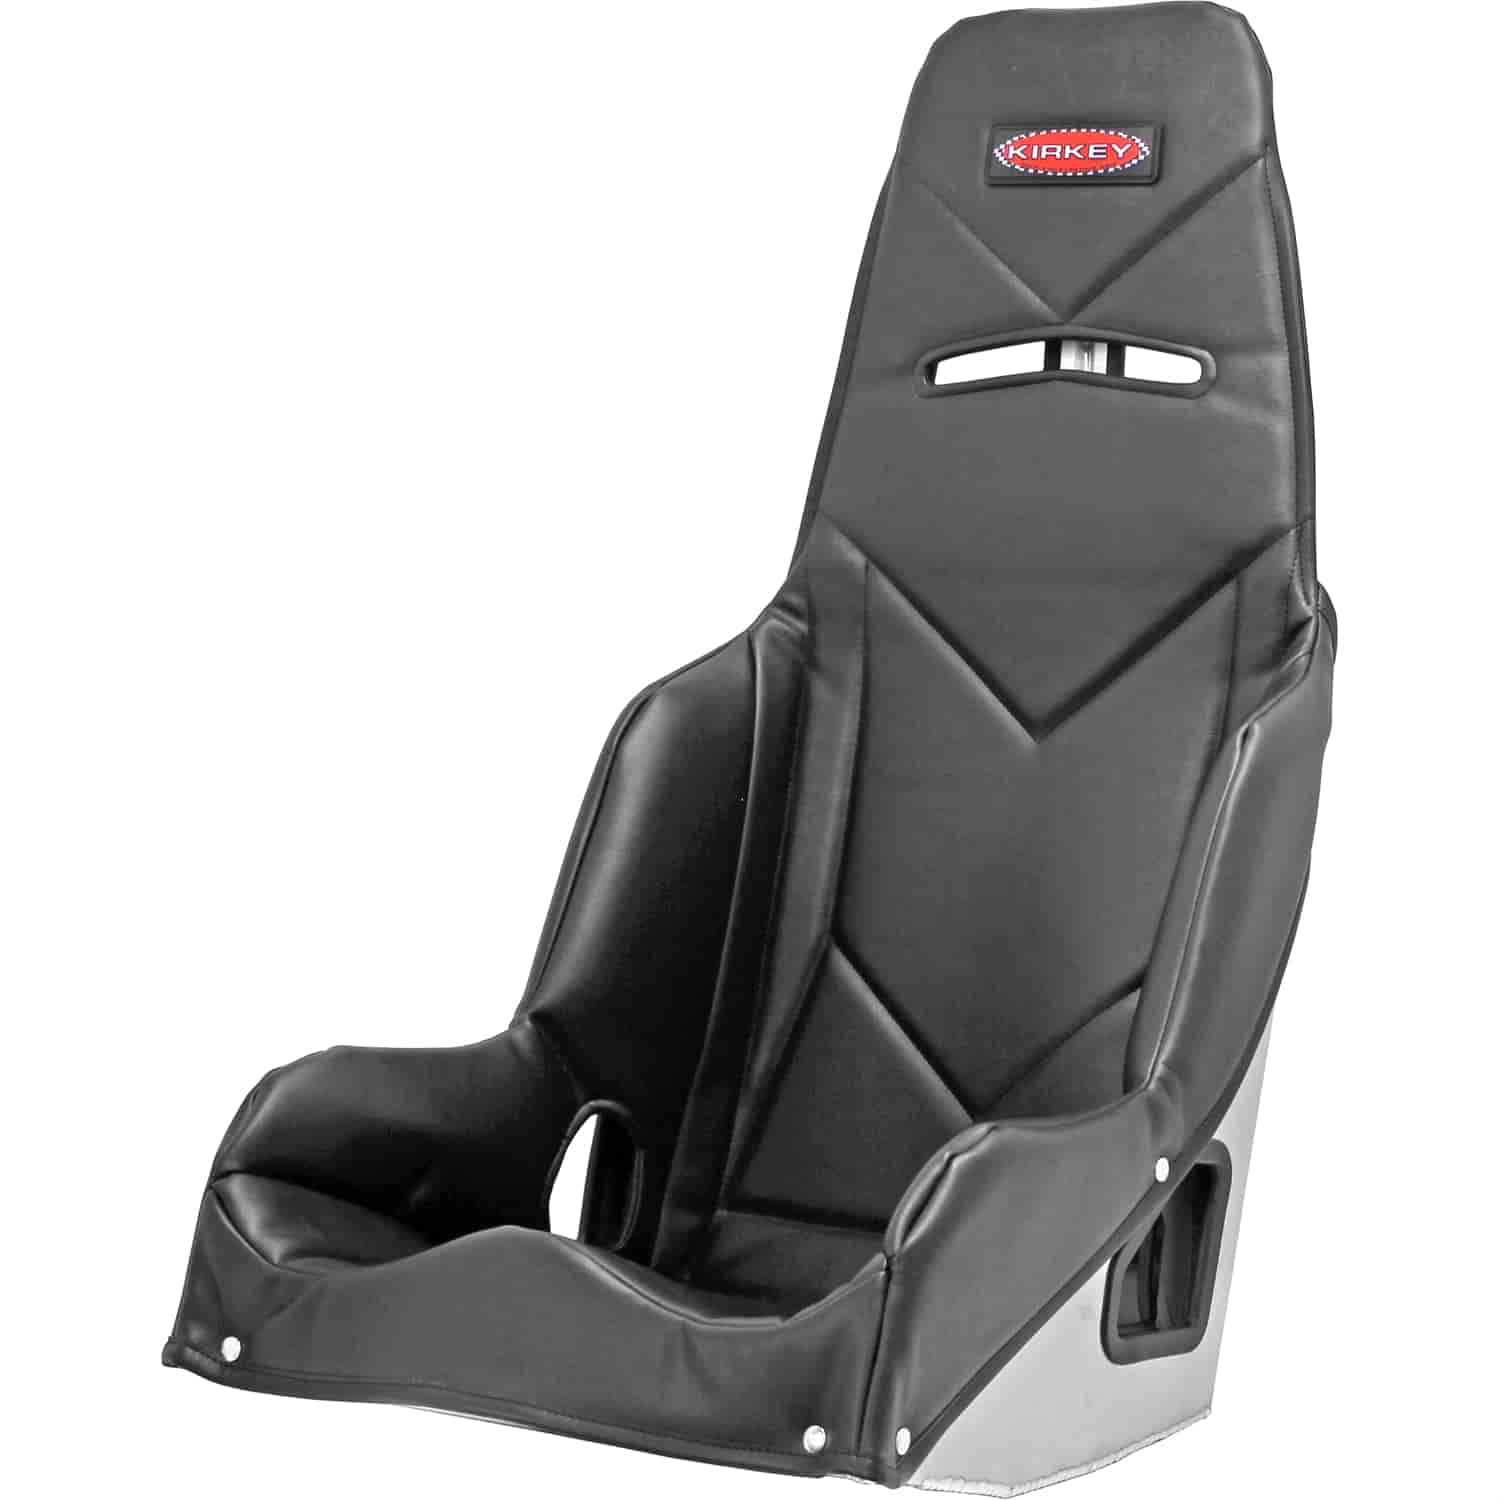 55 Series Pro Street Drag Seat Cover 18.5" Hip Width